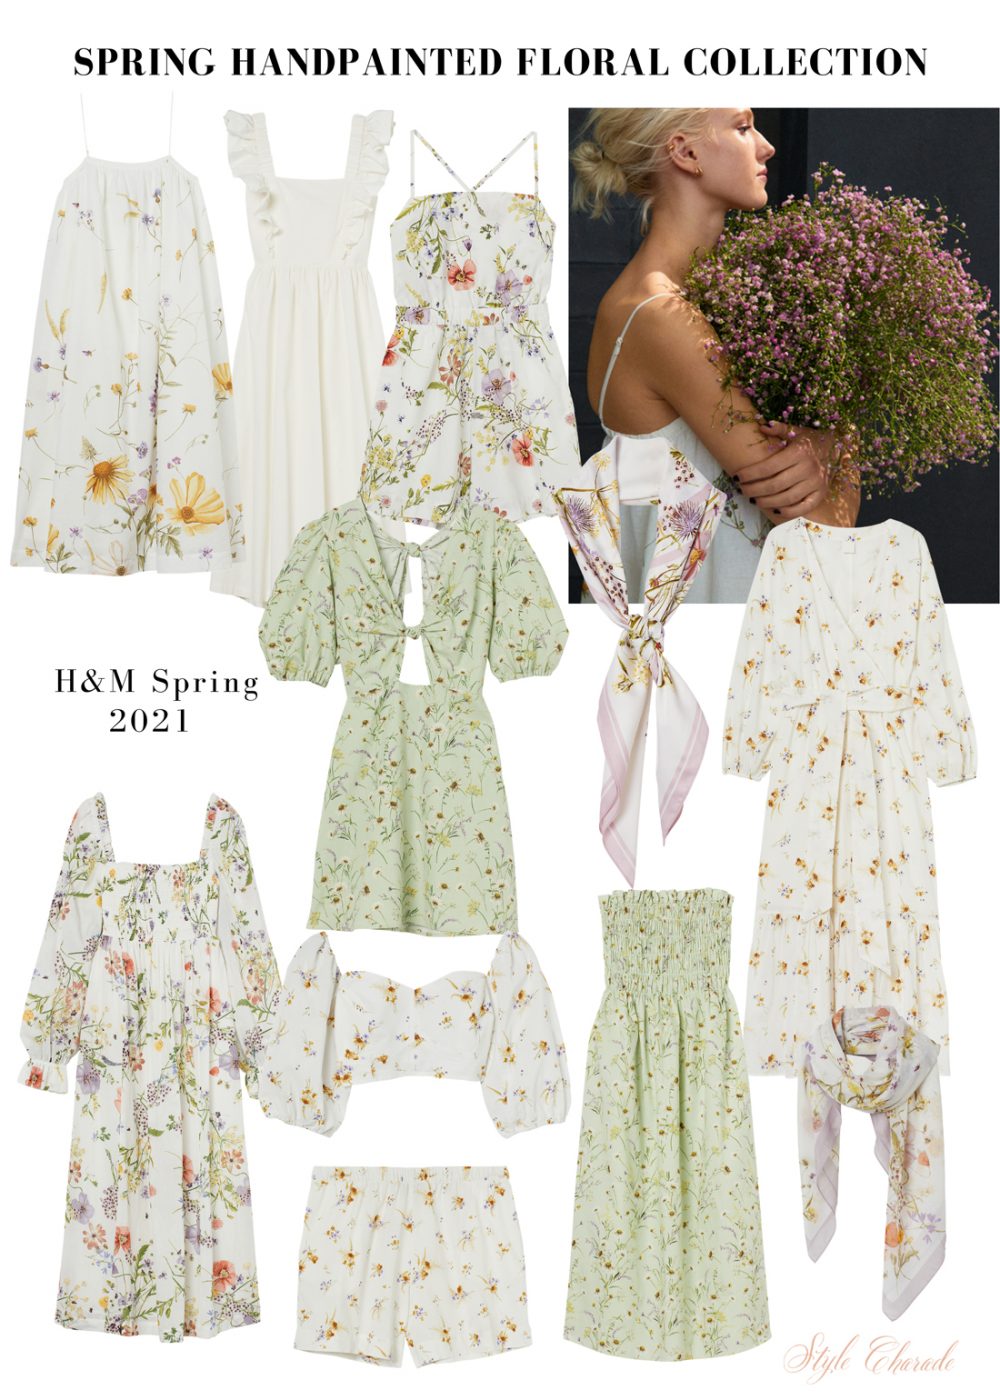 H☀M Handpainted Floral Collection | HM ...